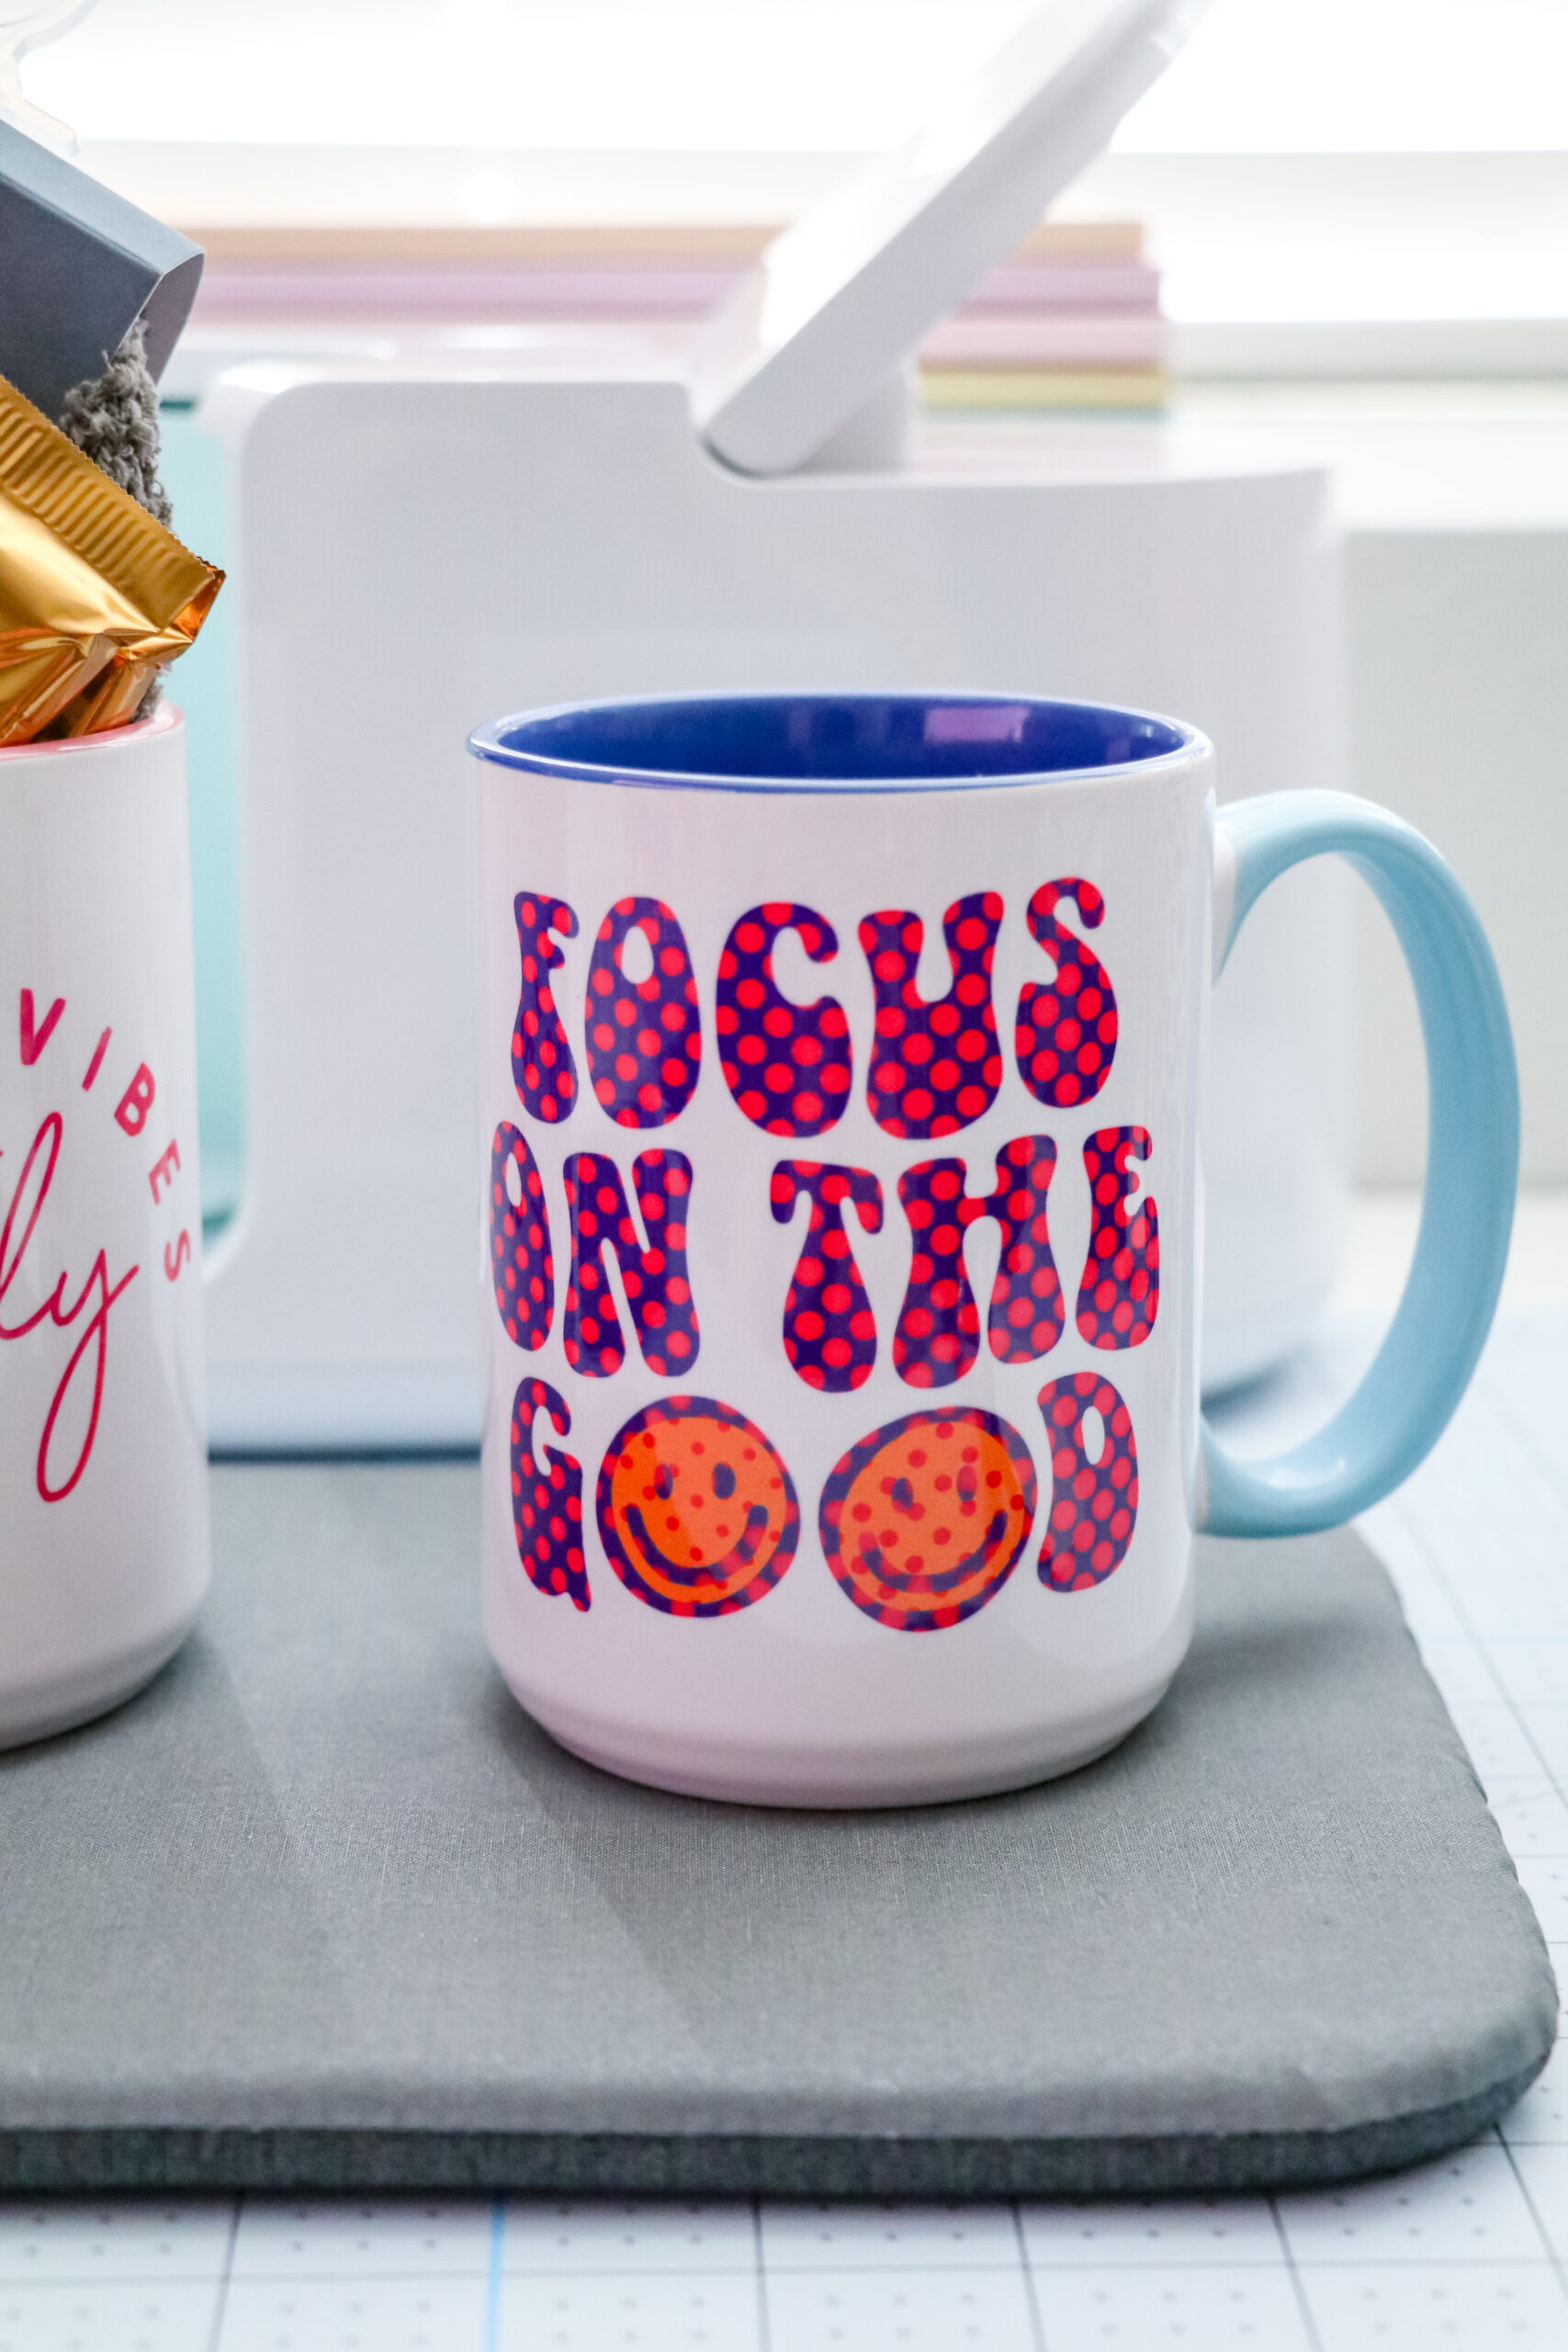 https://www.thedenverhousewife.com/wp-content/uploads/2022/10/How-to-Make-Cricut-Personalized-Mug-11-scaled.jpg